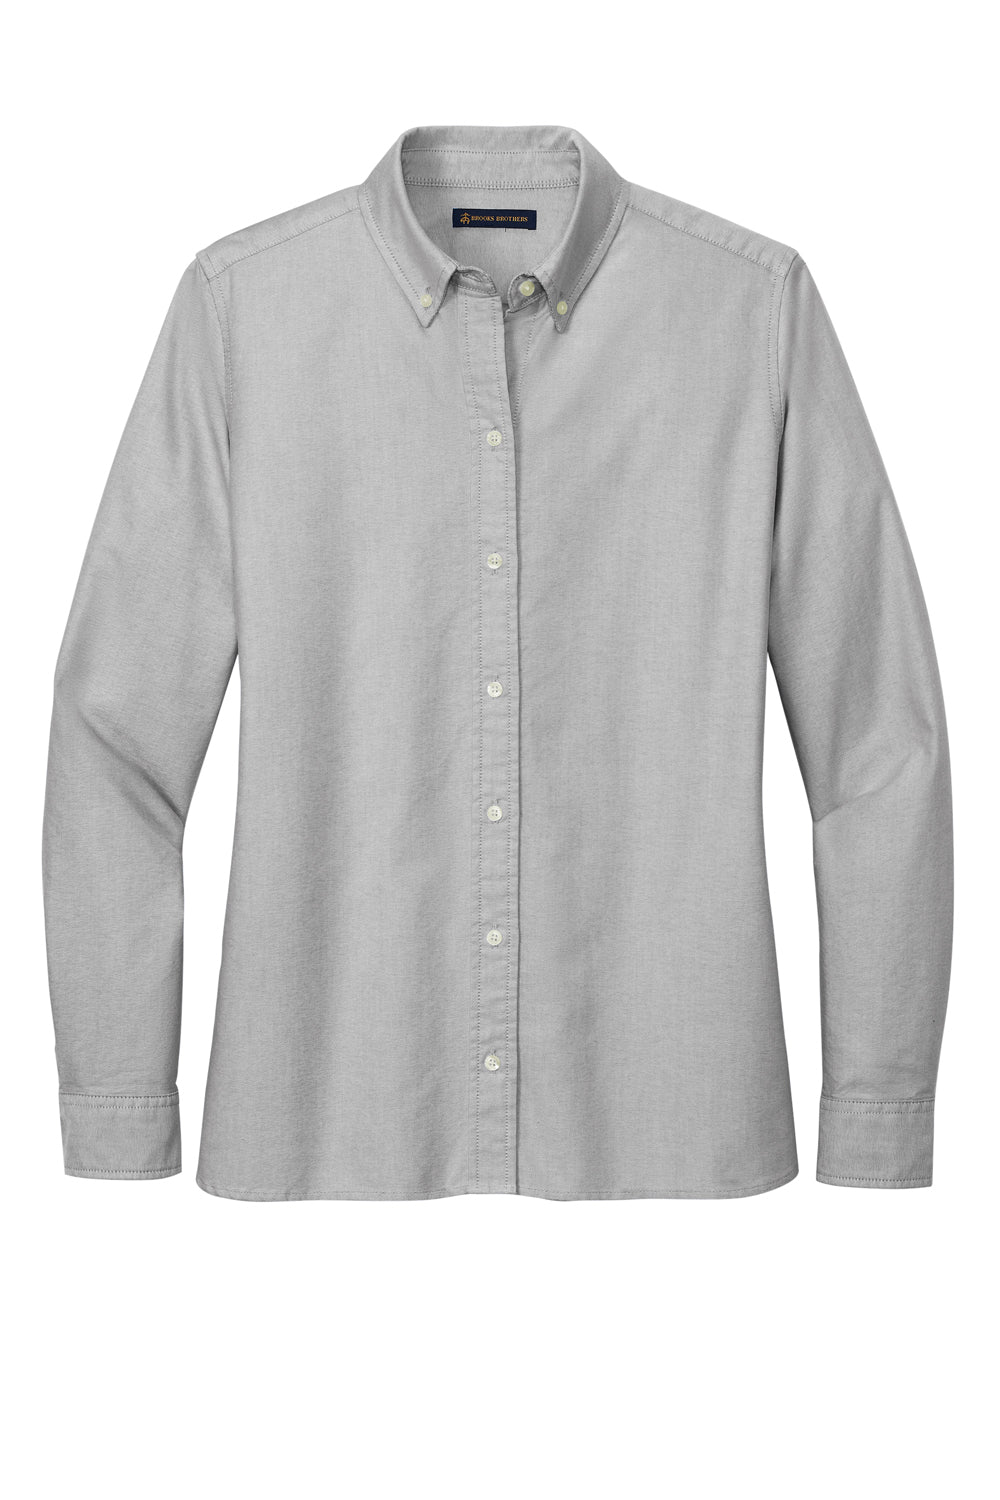 Brooks Brothers Womens Casual Oxford Long Sleeve Button Down Shirt Windsor Grey Flat Front